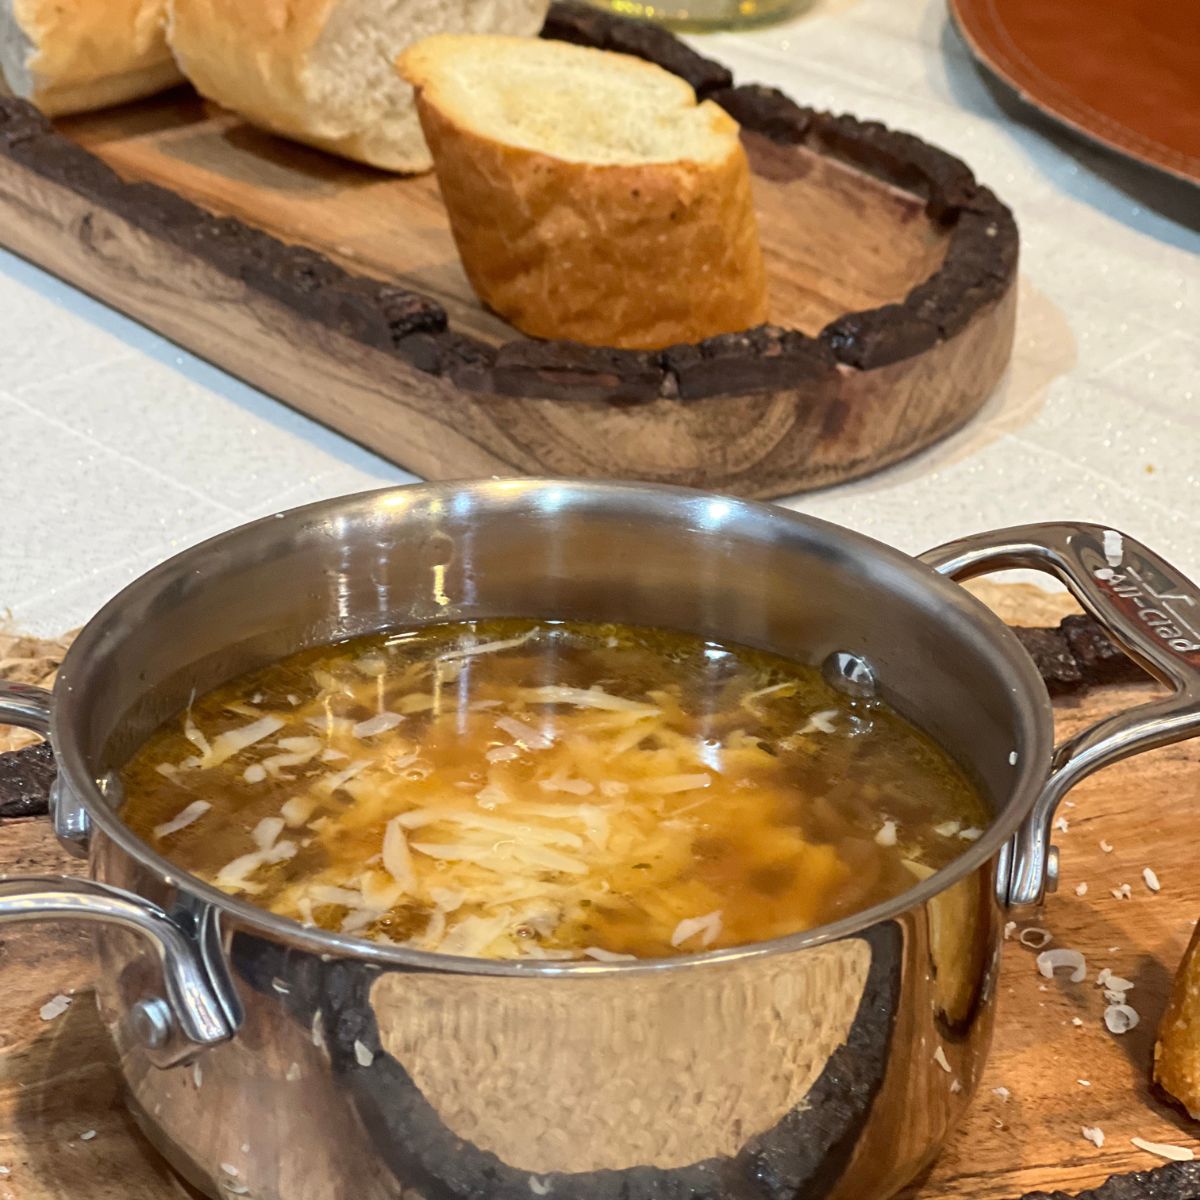 Crockpot French onion soup in a stainless steel pot with sliced bread on the side